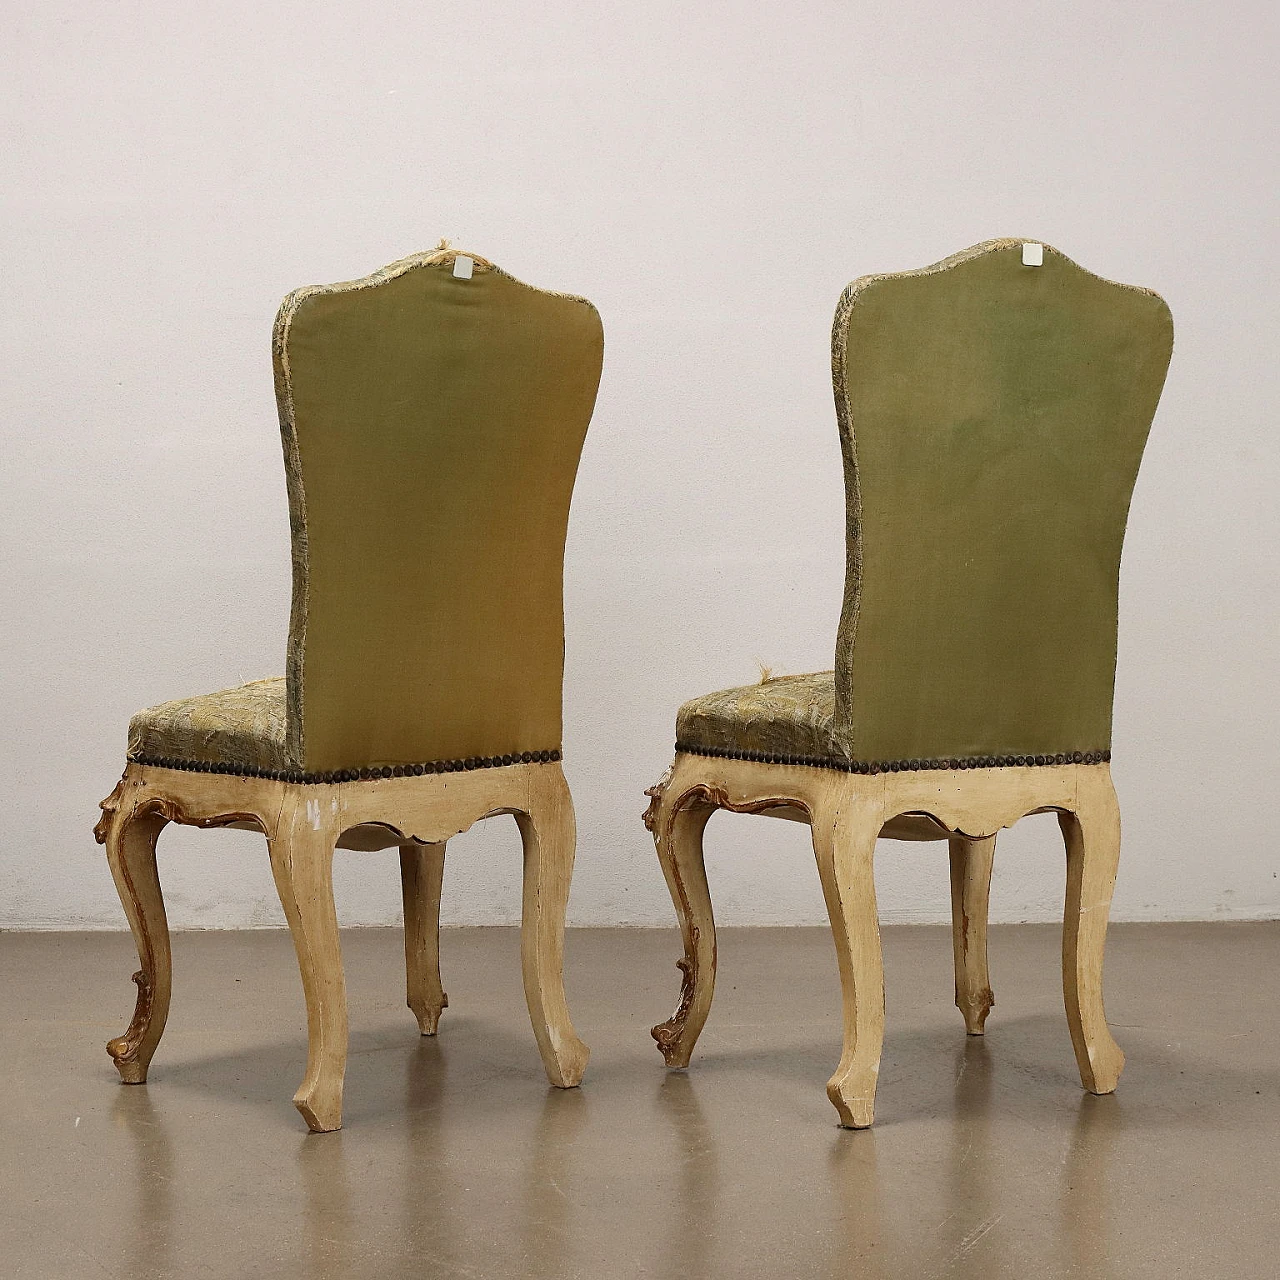 Pair of gilt chairs with leaf motifs & brocade fabric, 19th century 10